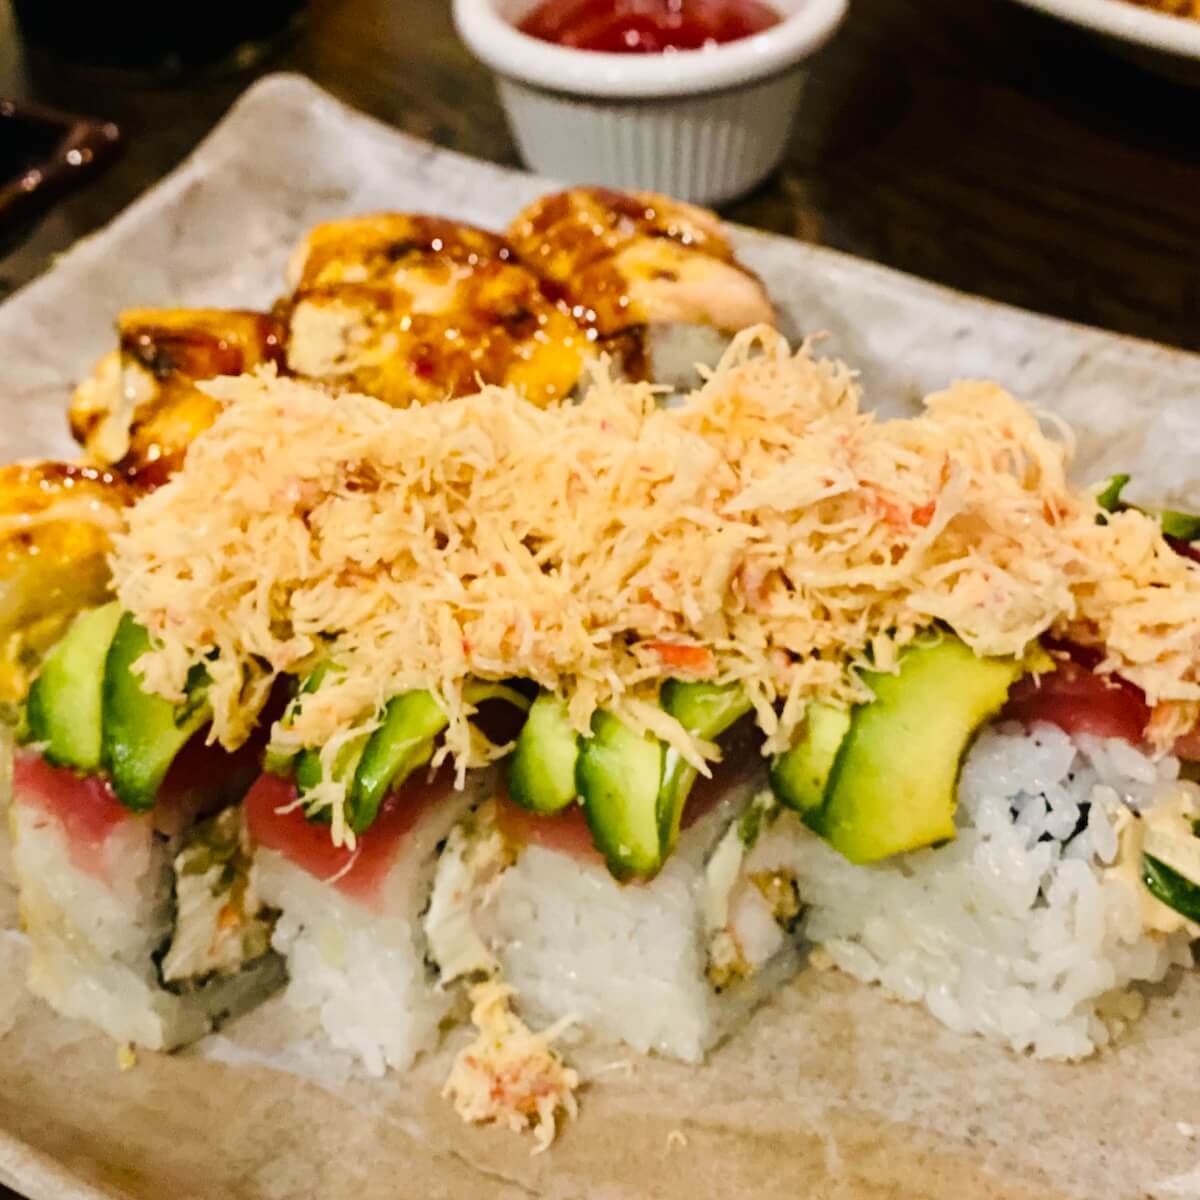 Sushi rolls at old florida fish house on 30a seagrove